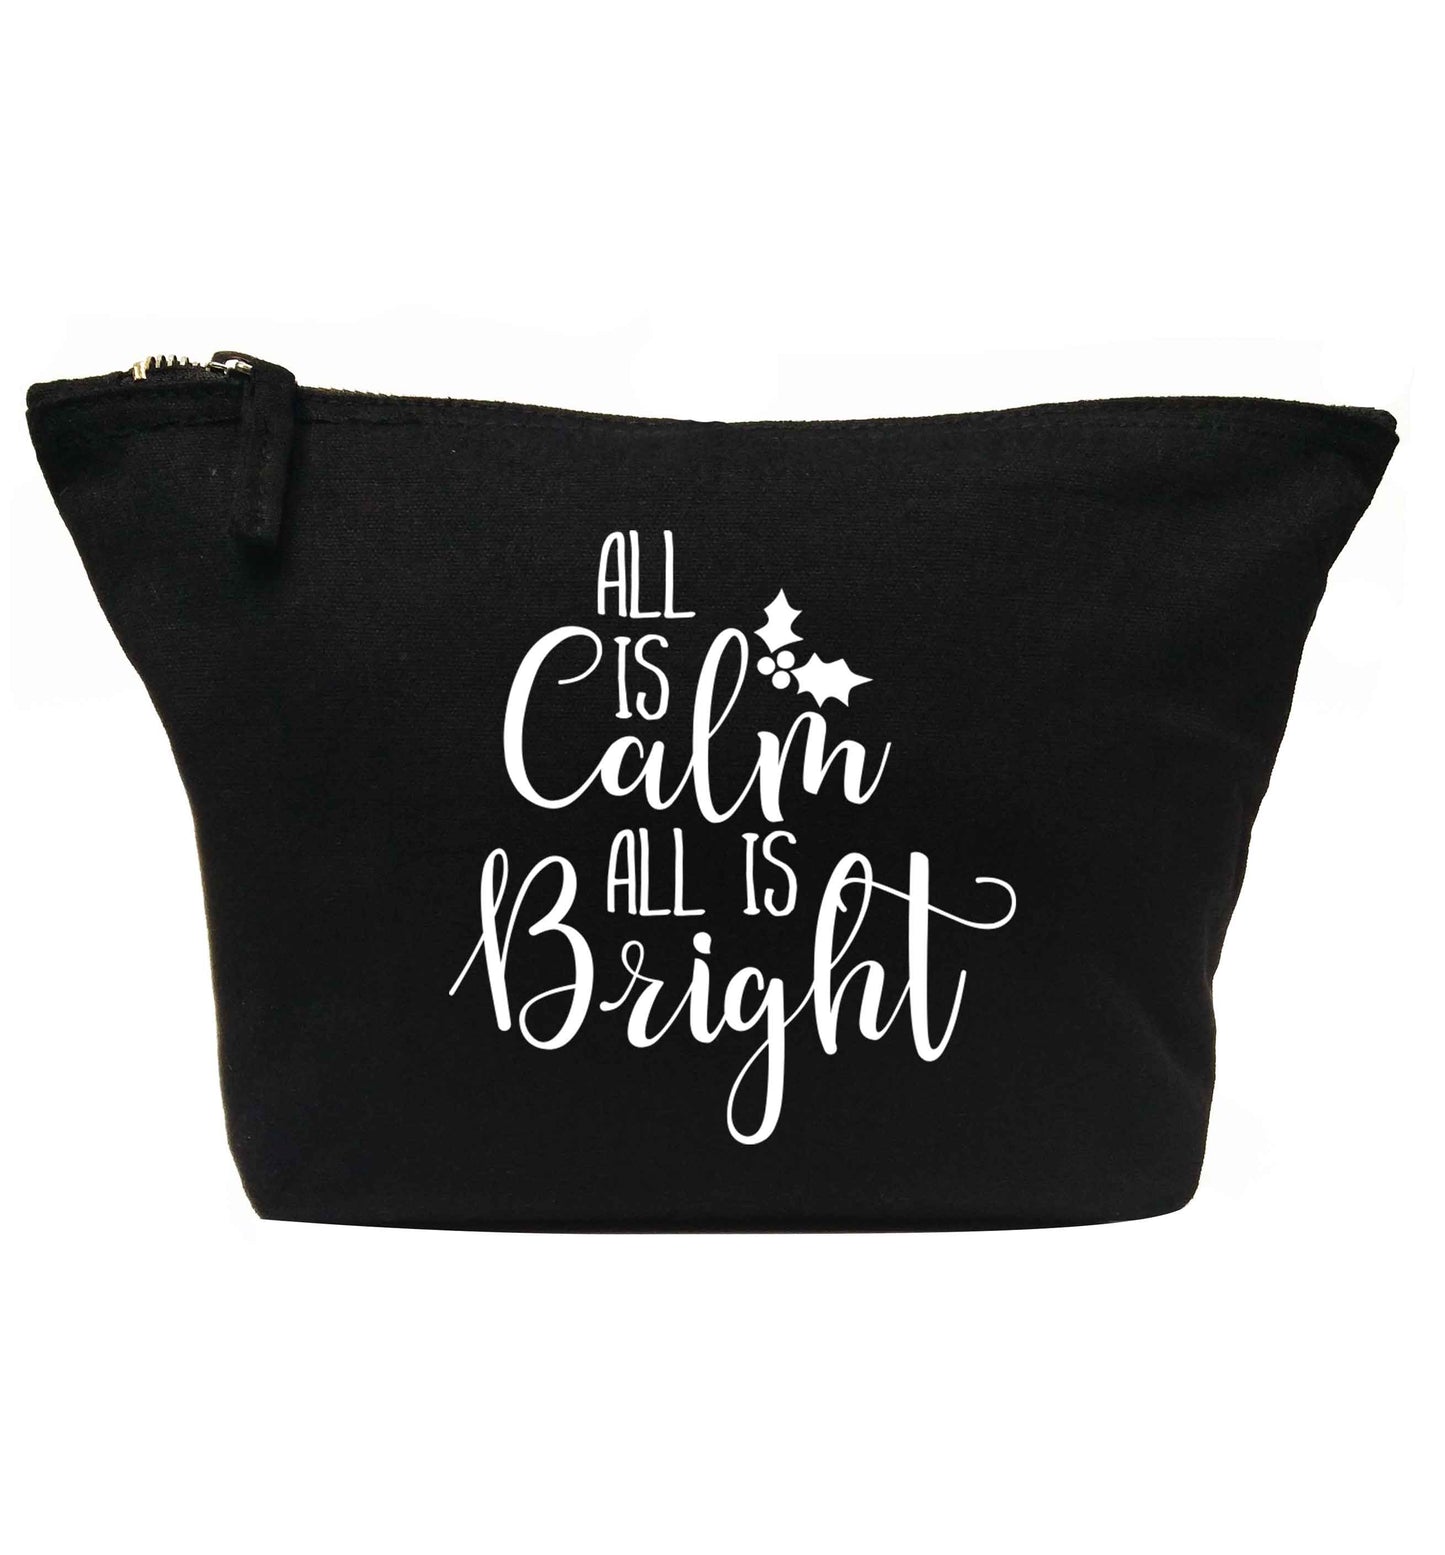 All is calm is bright | makeup / wash bag